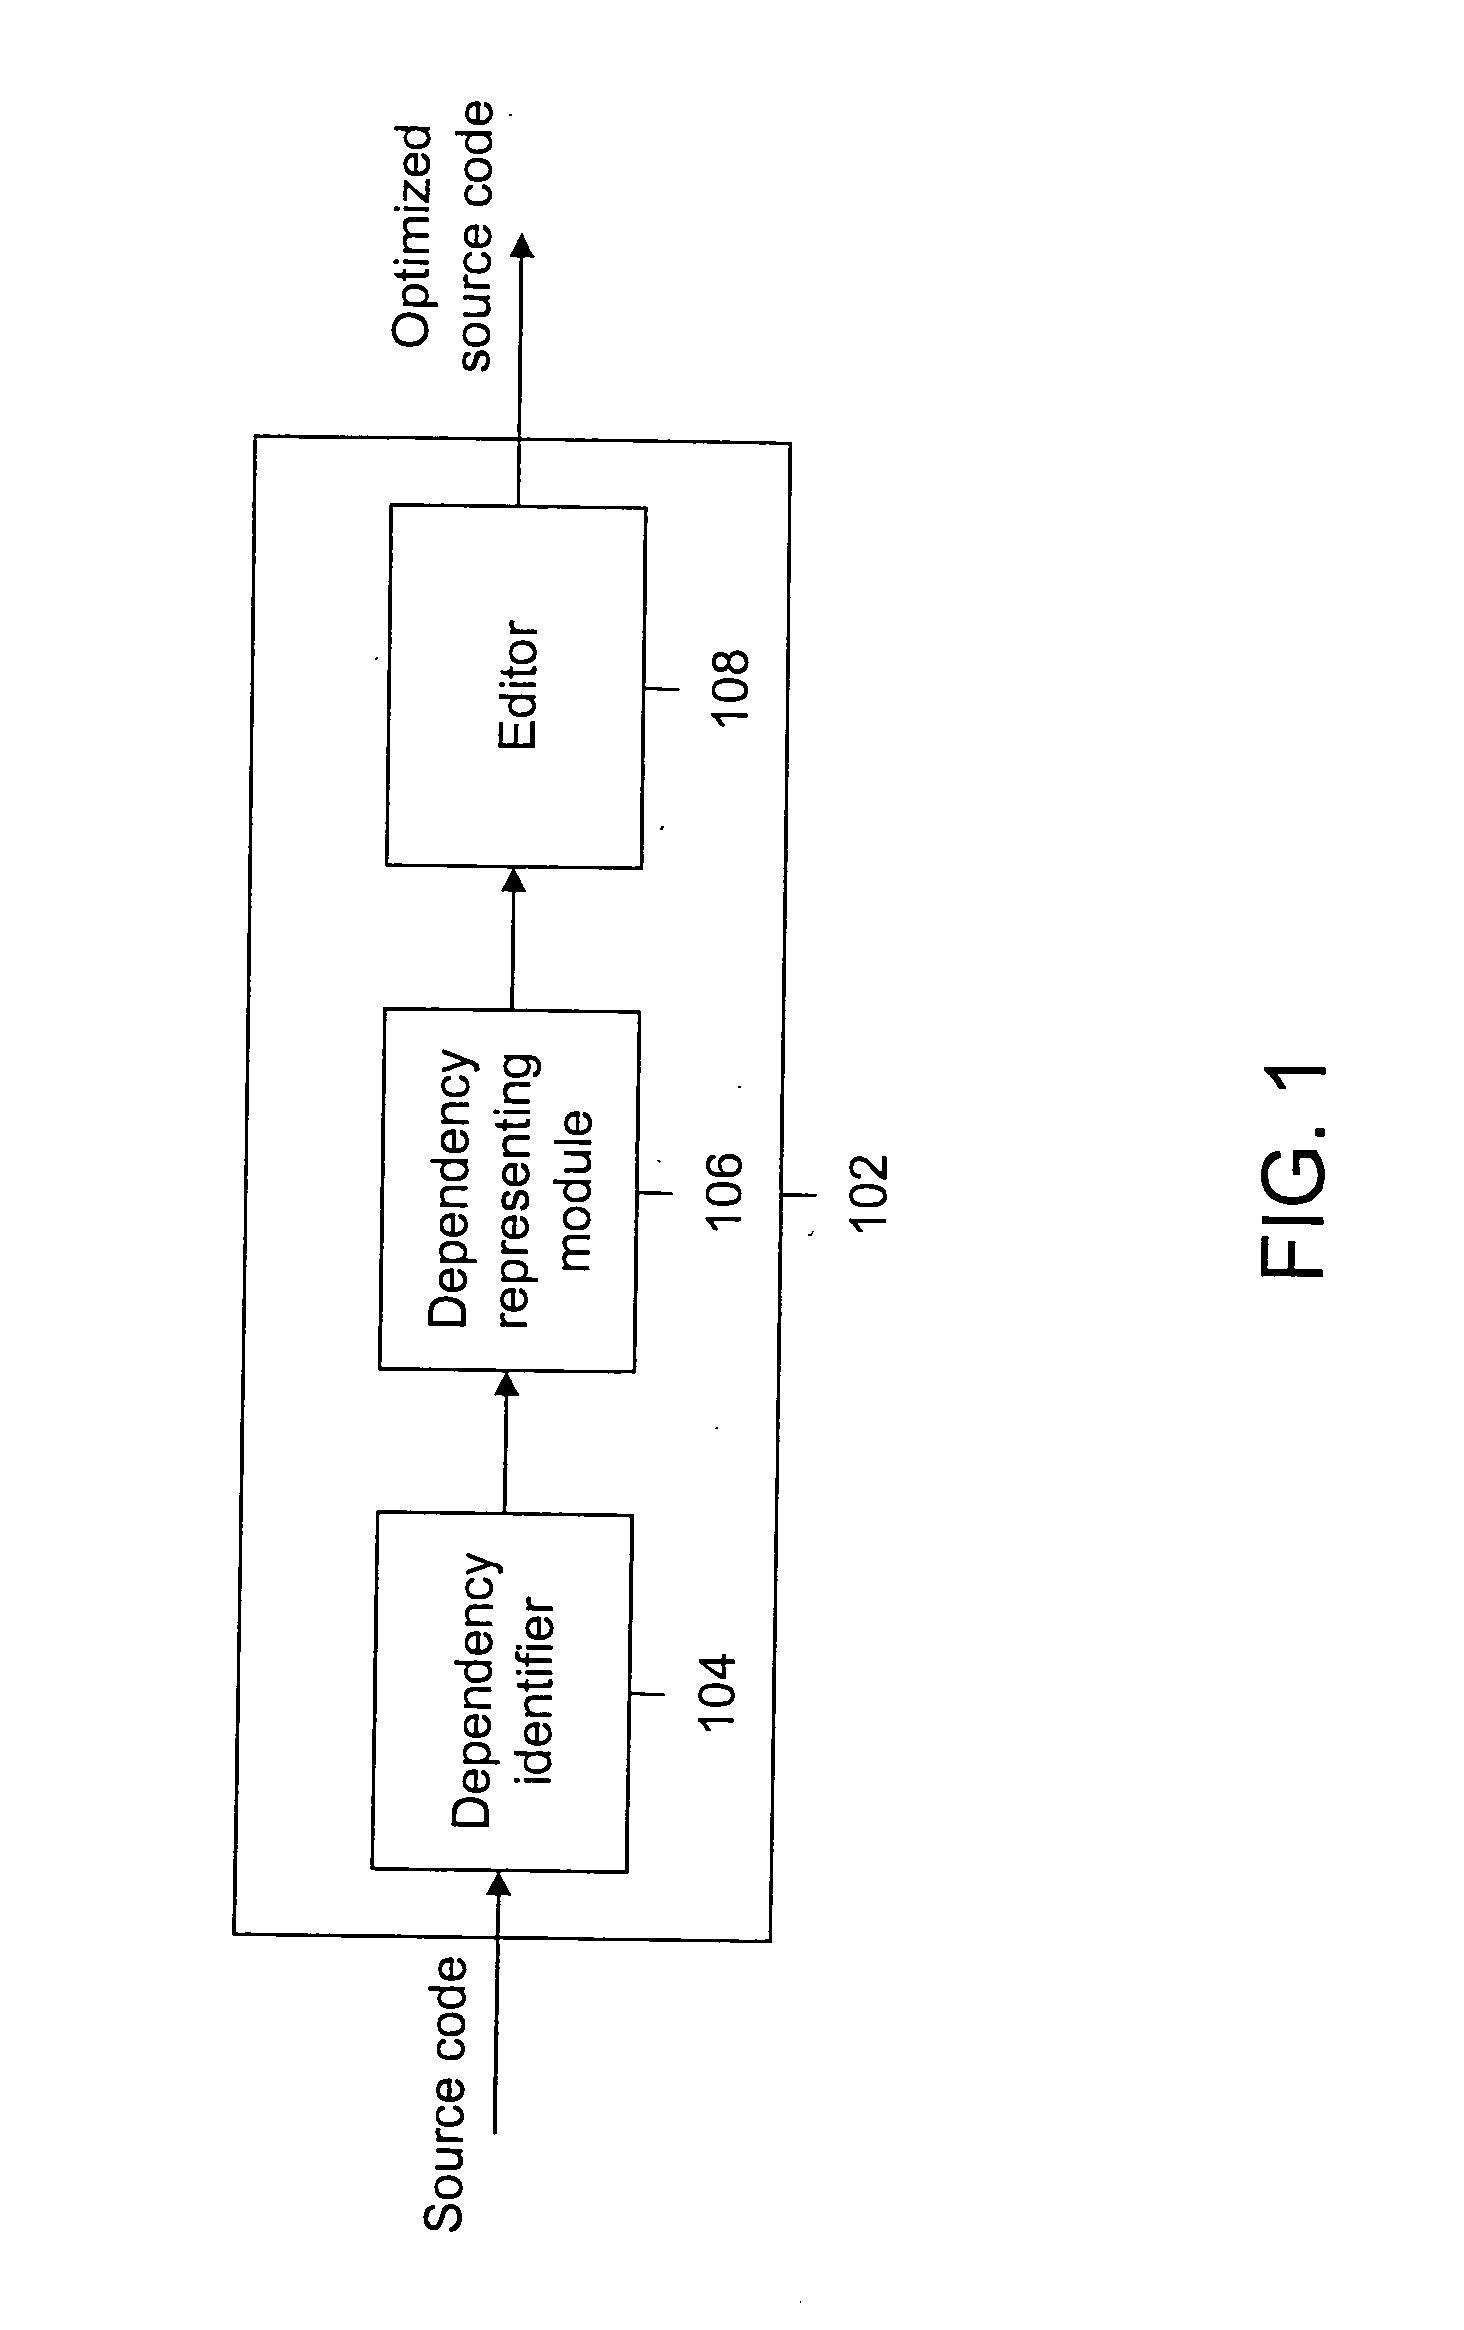 Method and system for optimizing source code